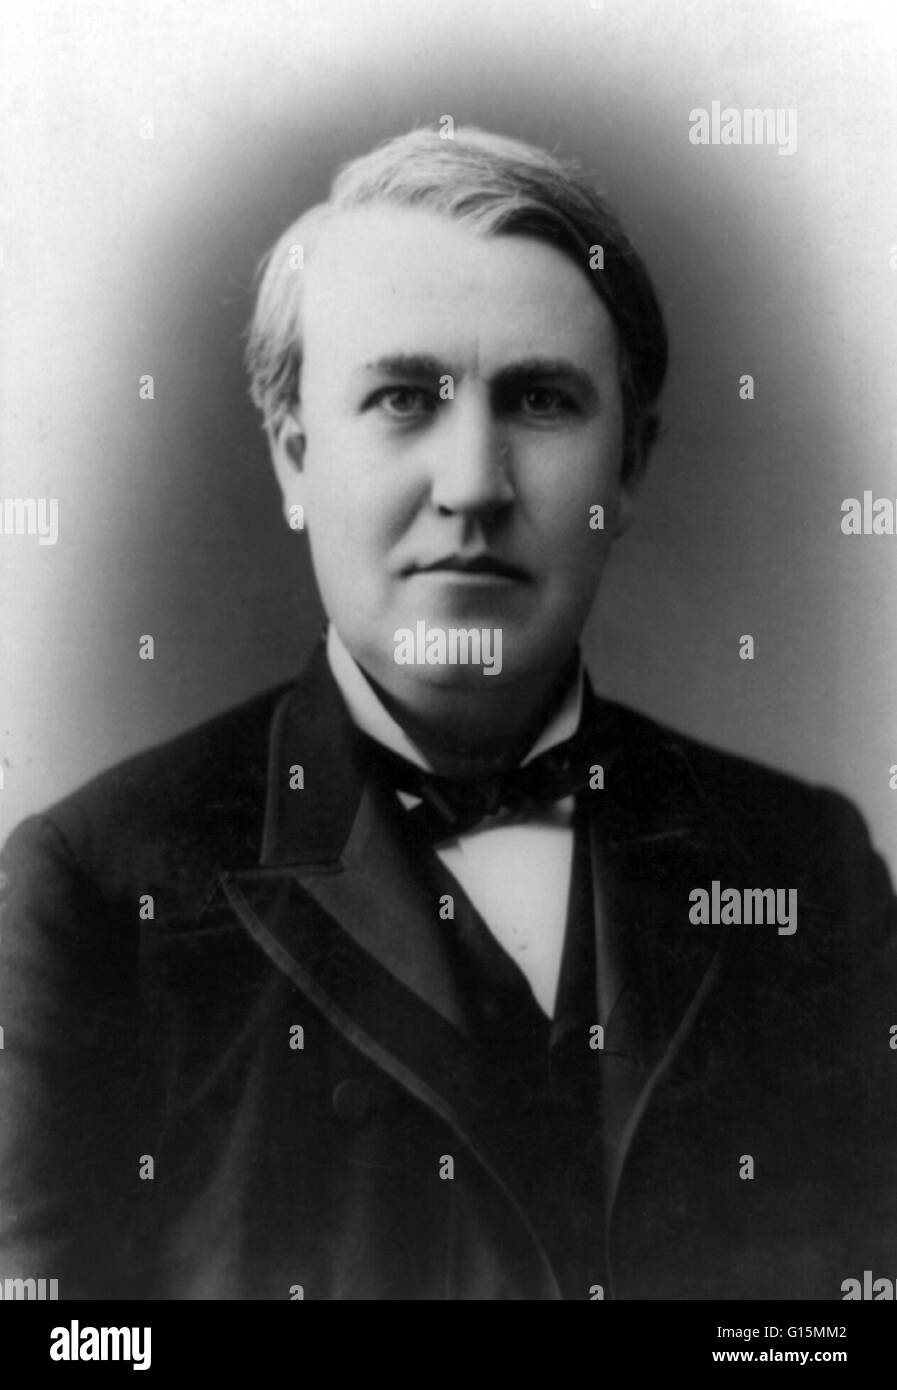 Thomas Alva Edison (February 11, 1847 - October 18, 1931) was an American inventor and businessman. He developed many devices that greatly influenced life around the world, including the phonograph, the motion picture camera, and a long-lasting, practical Stock Photo